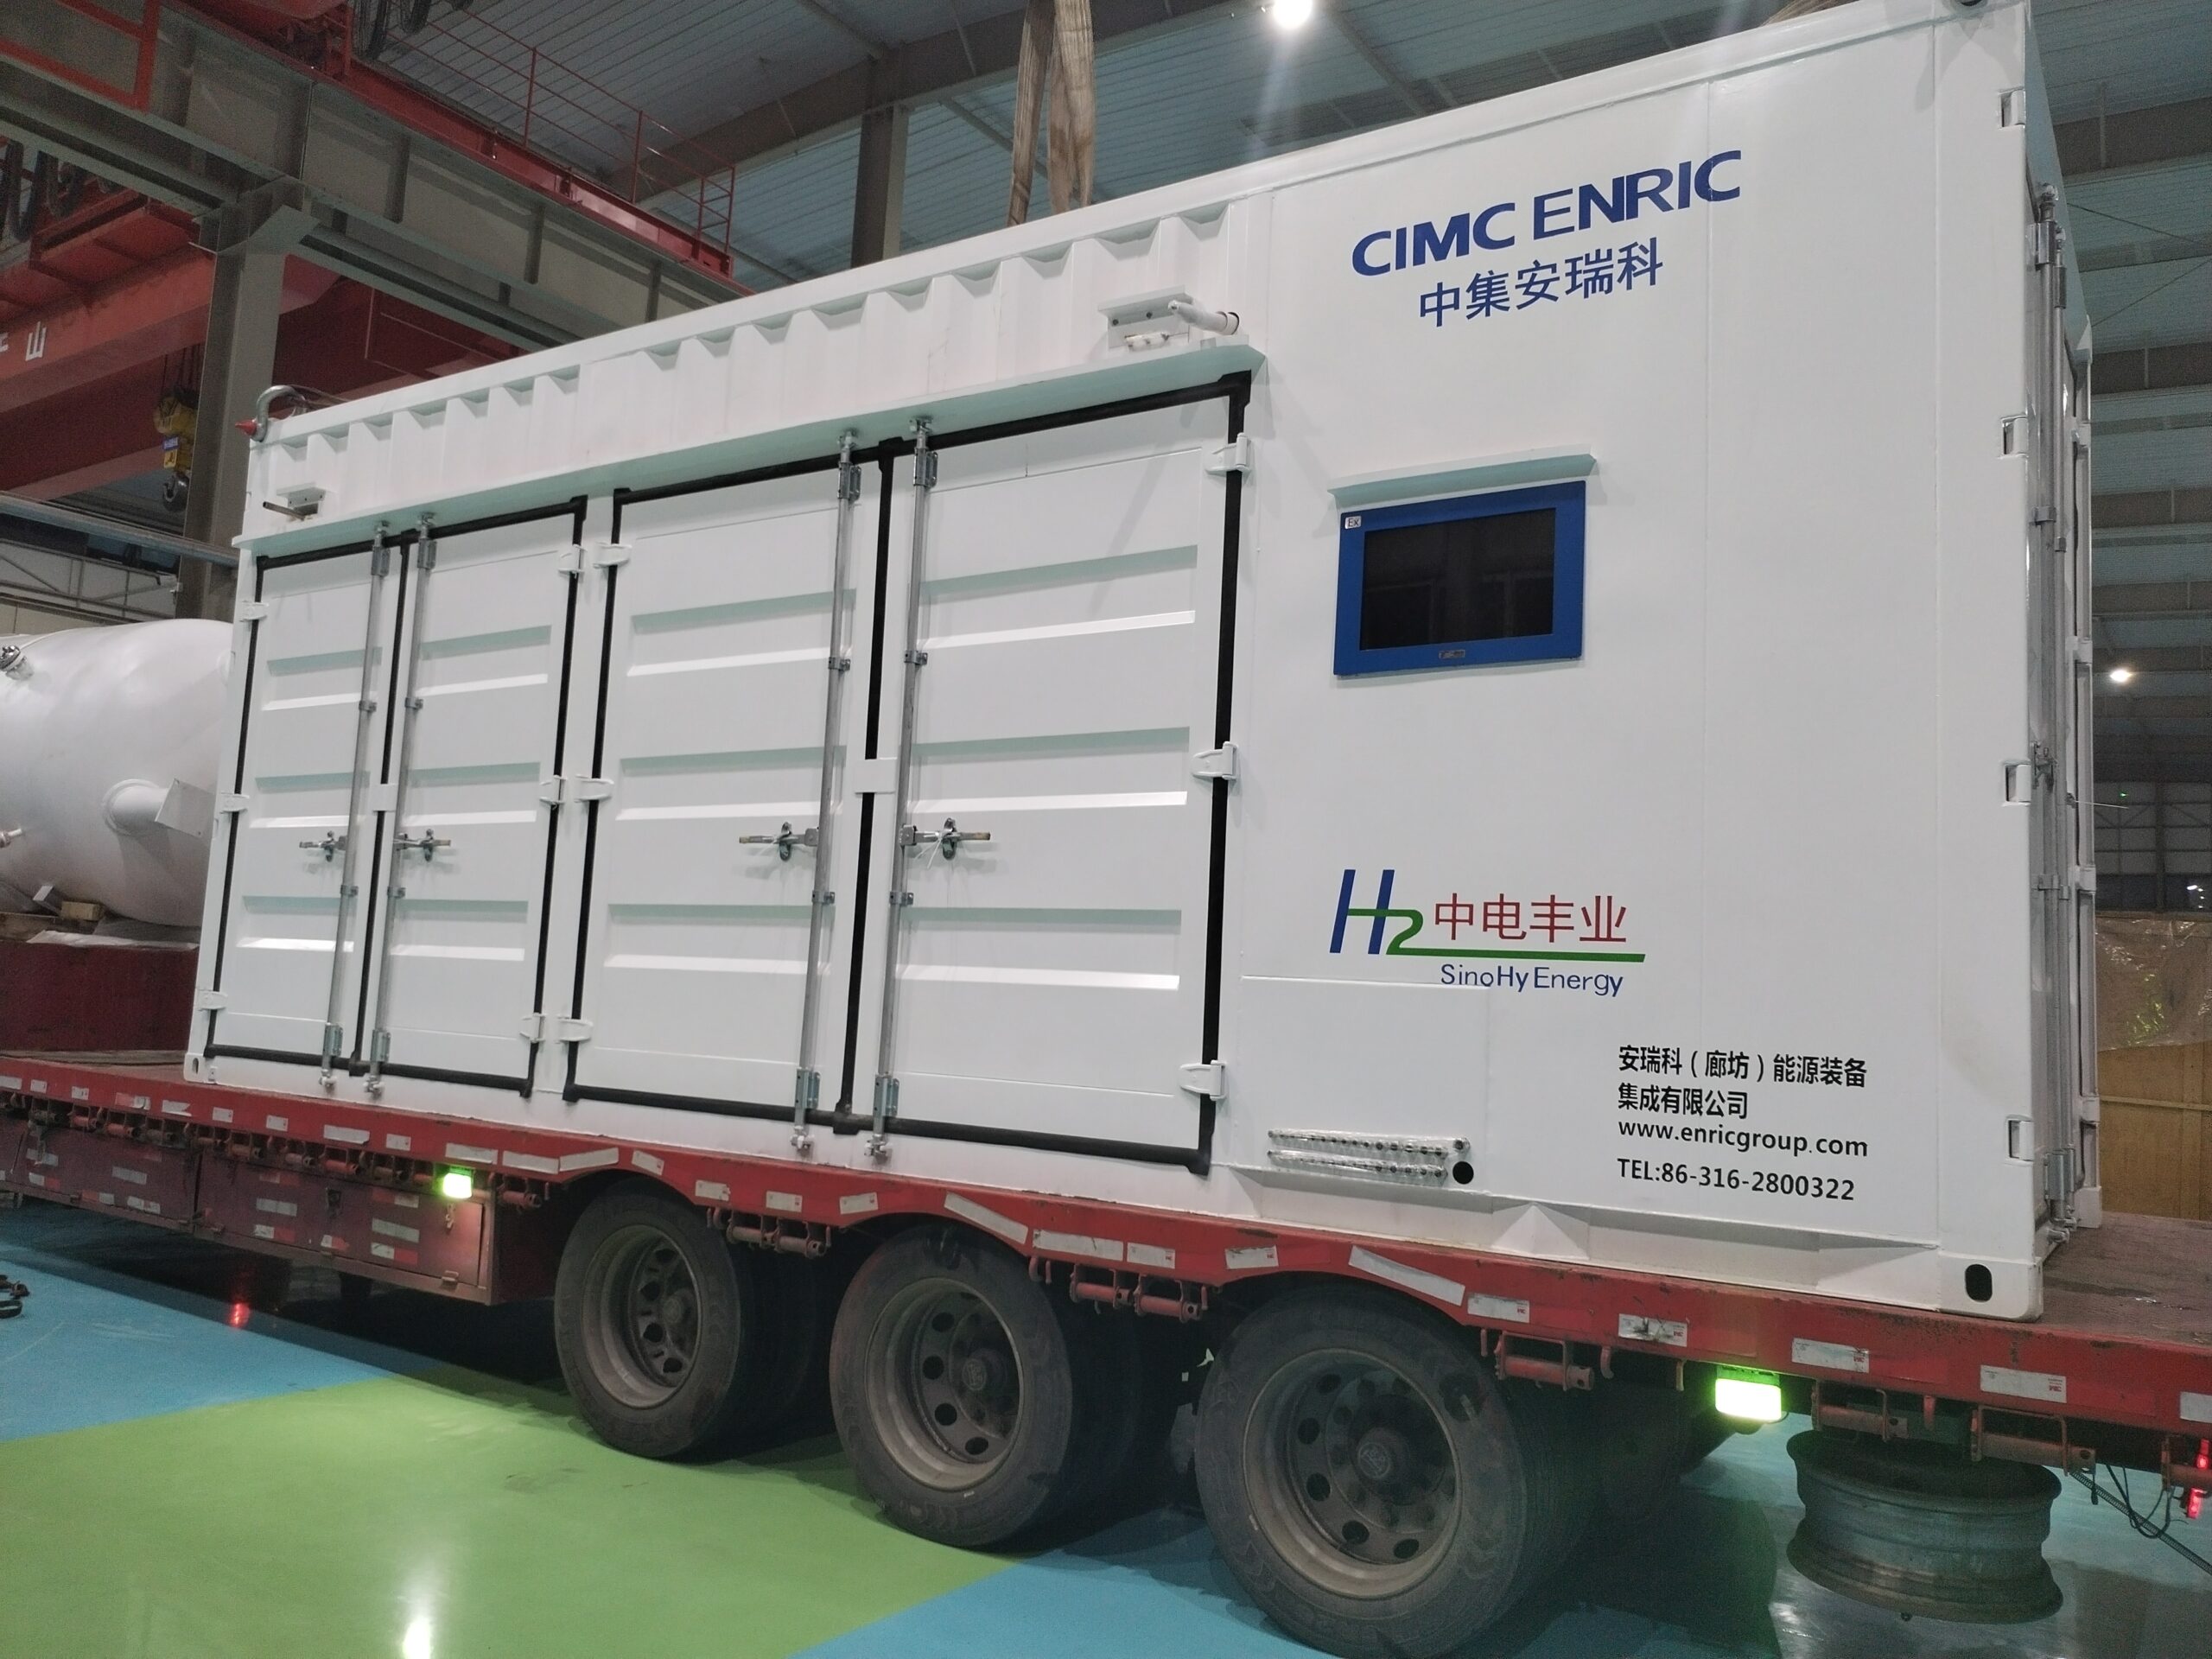 SinoHy Energy Completes Equipment Supply for CIMC Hydrogen Energy's First Zero Carbon Smart Energy Application Demonstration Project